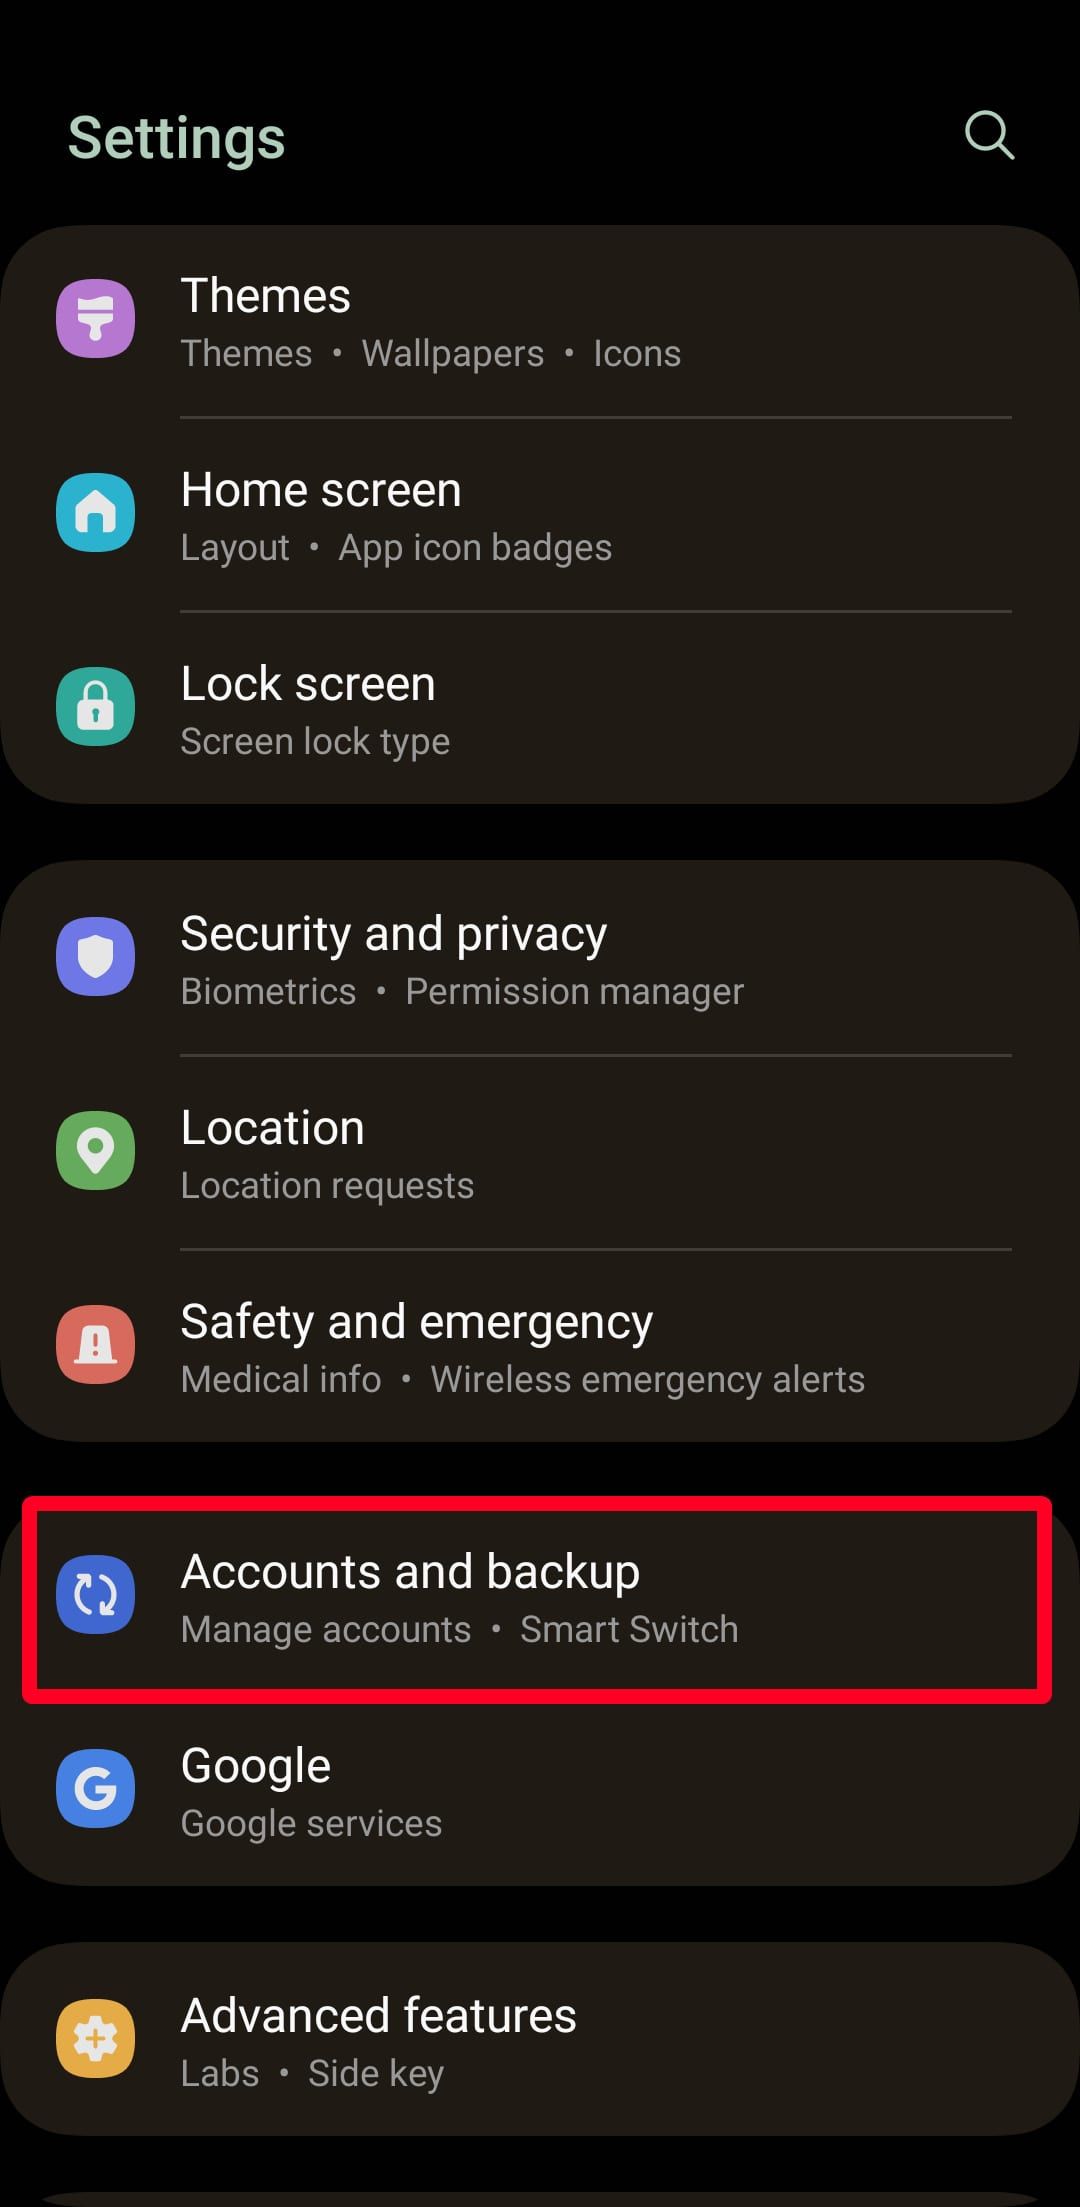 The Settings menu on a Samsung phone with the 